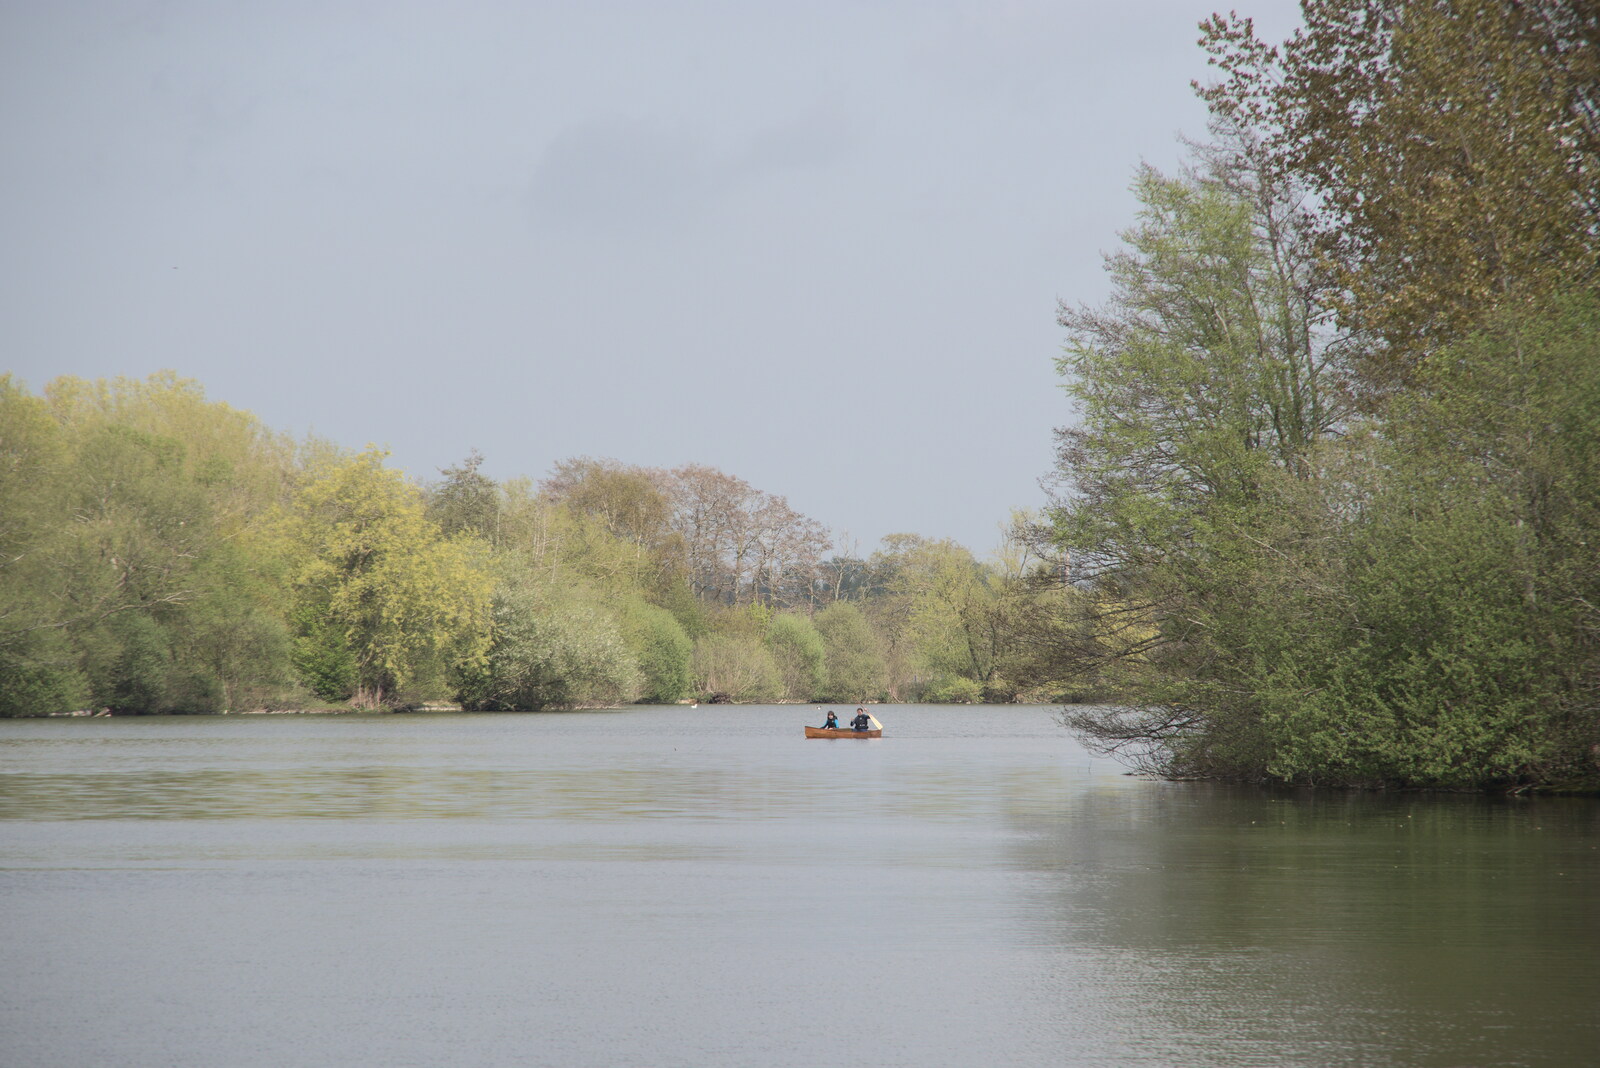 The Canoe's First Outing, Weybread Lake, Harleston - 1st May 2022: Fred and Isobel in a distant canoe